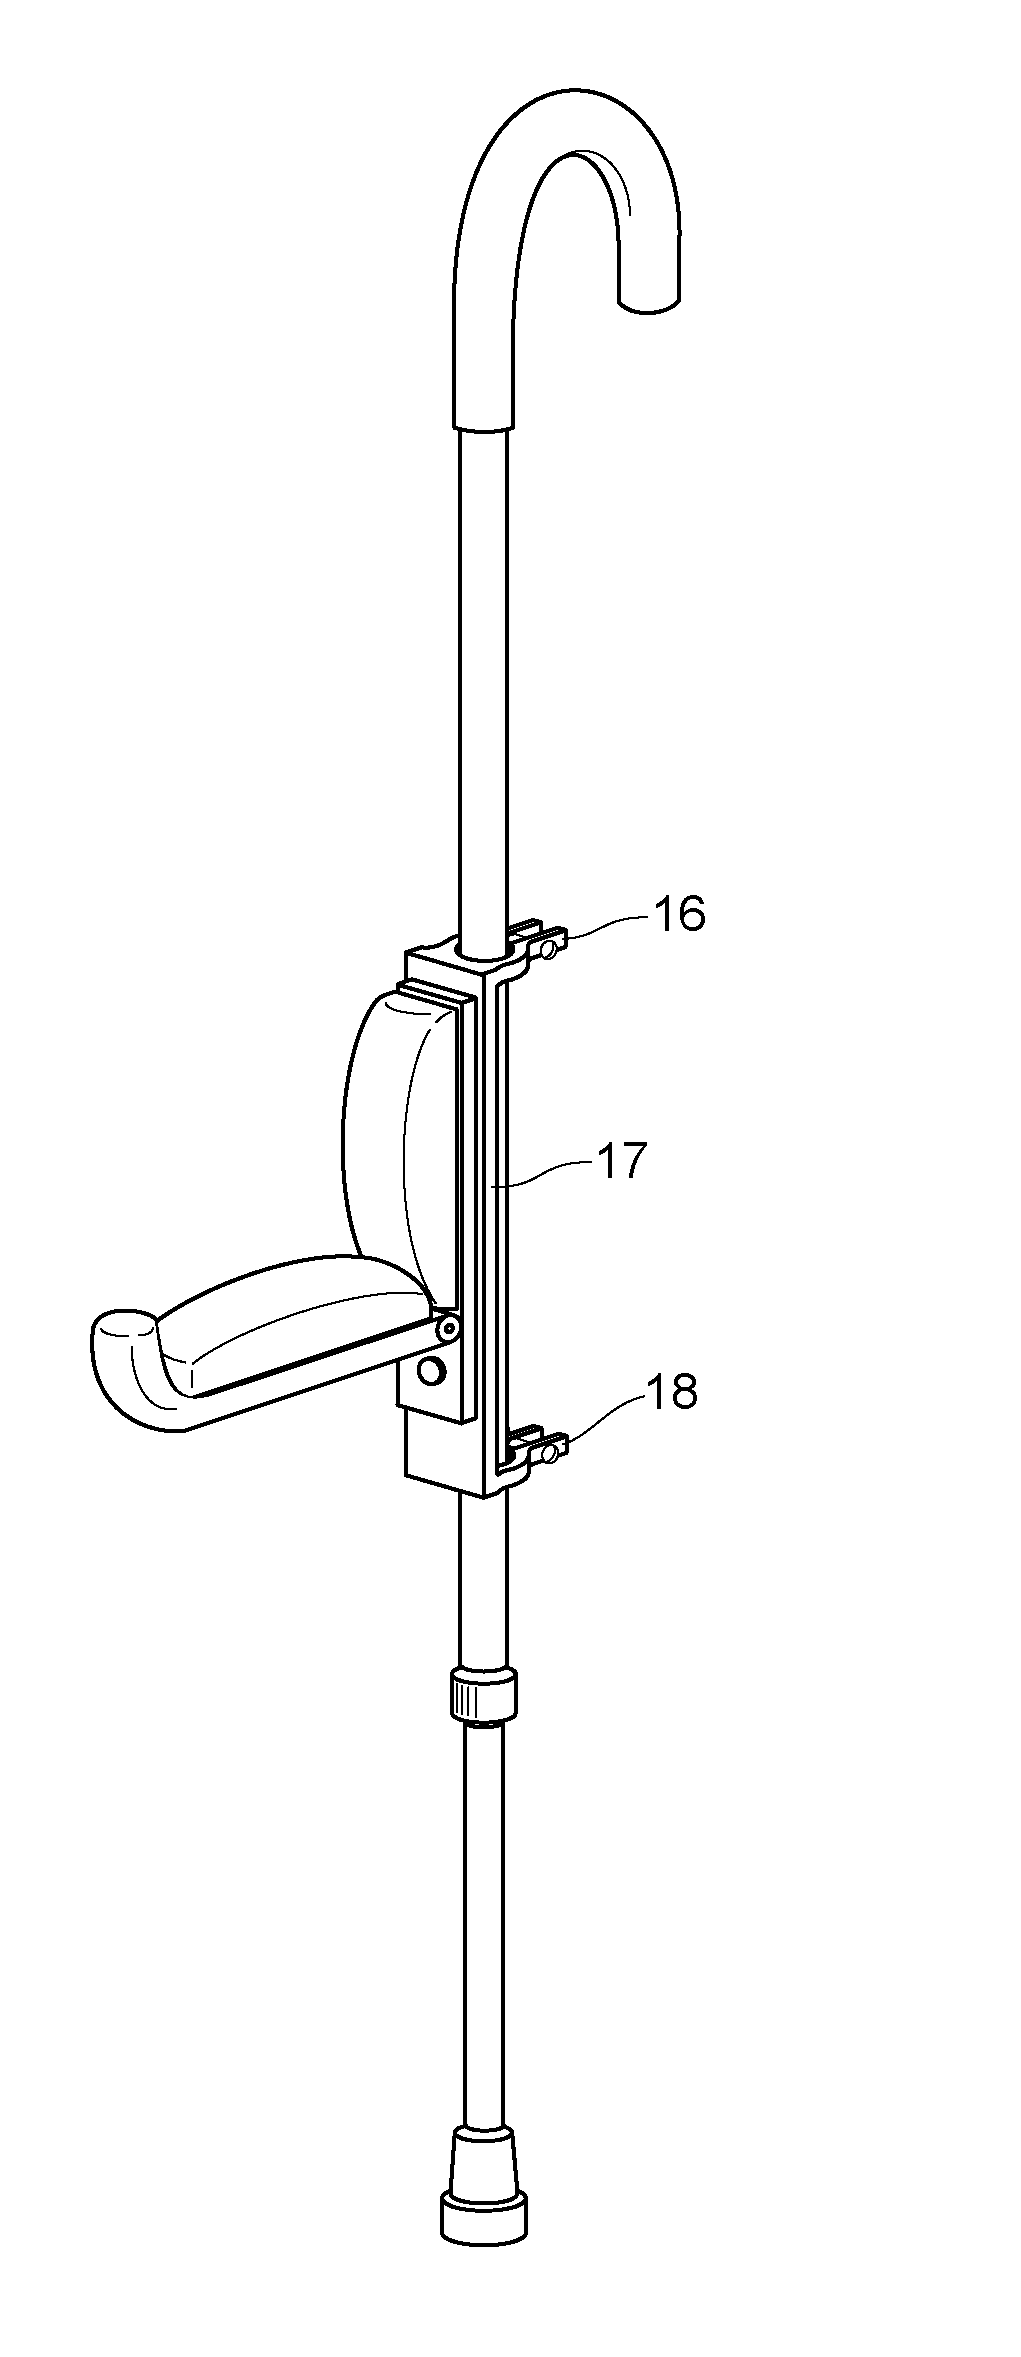 Calf, ankle, foot, or leg rest for cane and cane with device attached